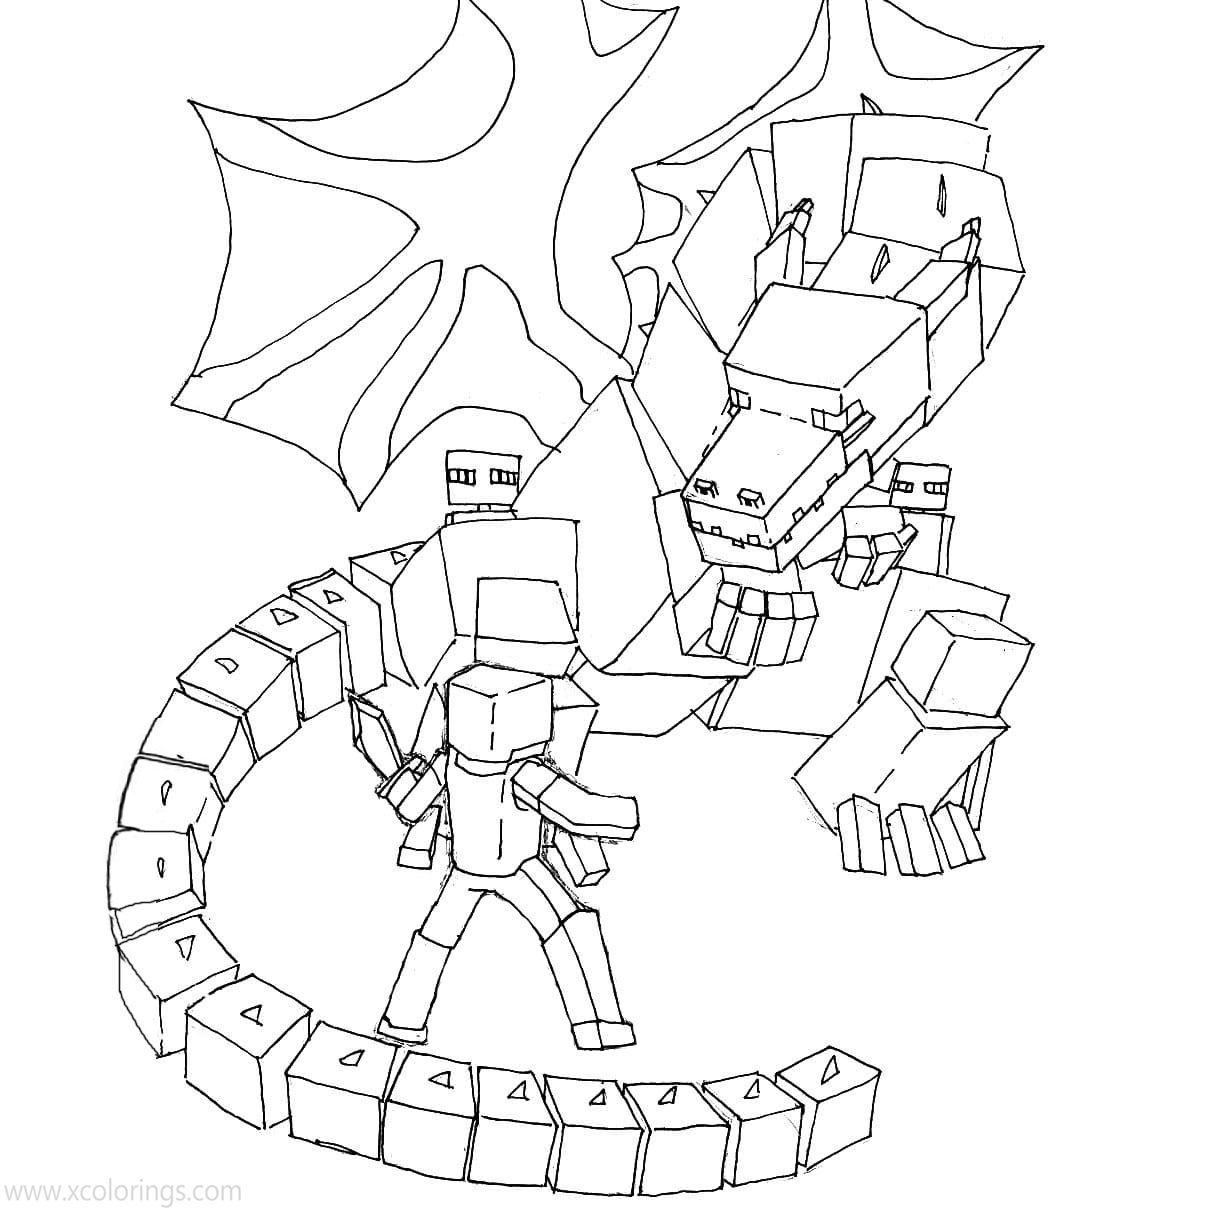 Free Ender Dragon Coloring Pages Clipart Black and White printable